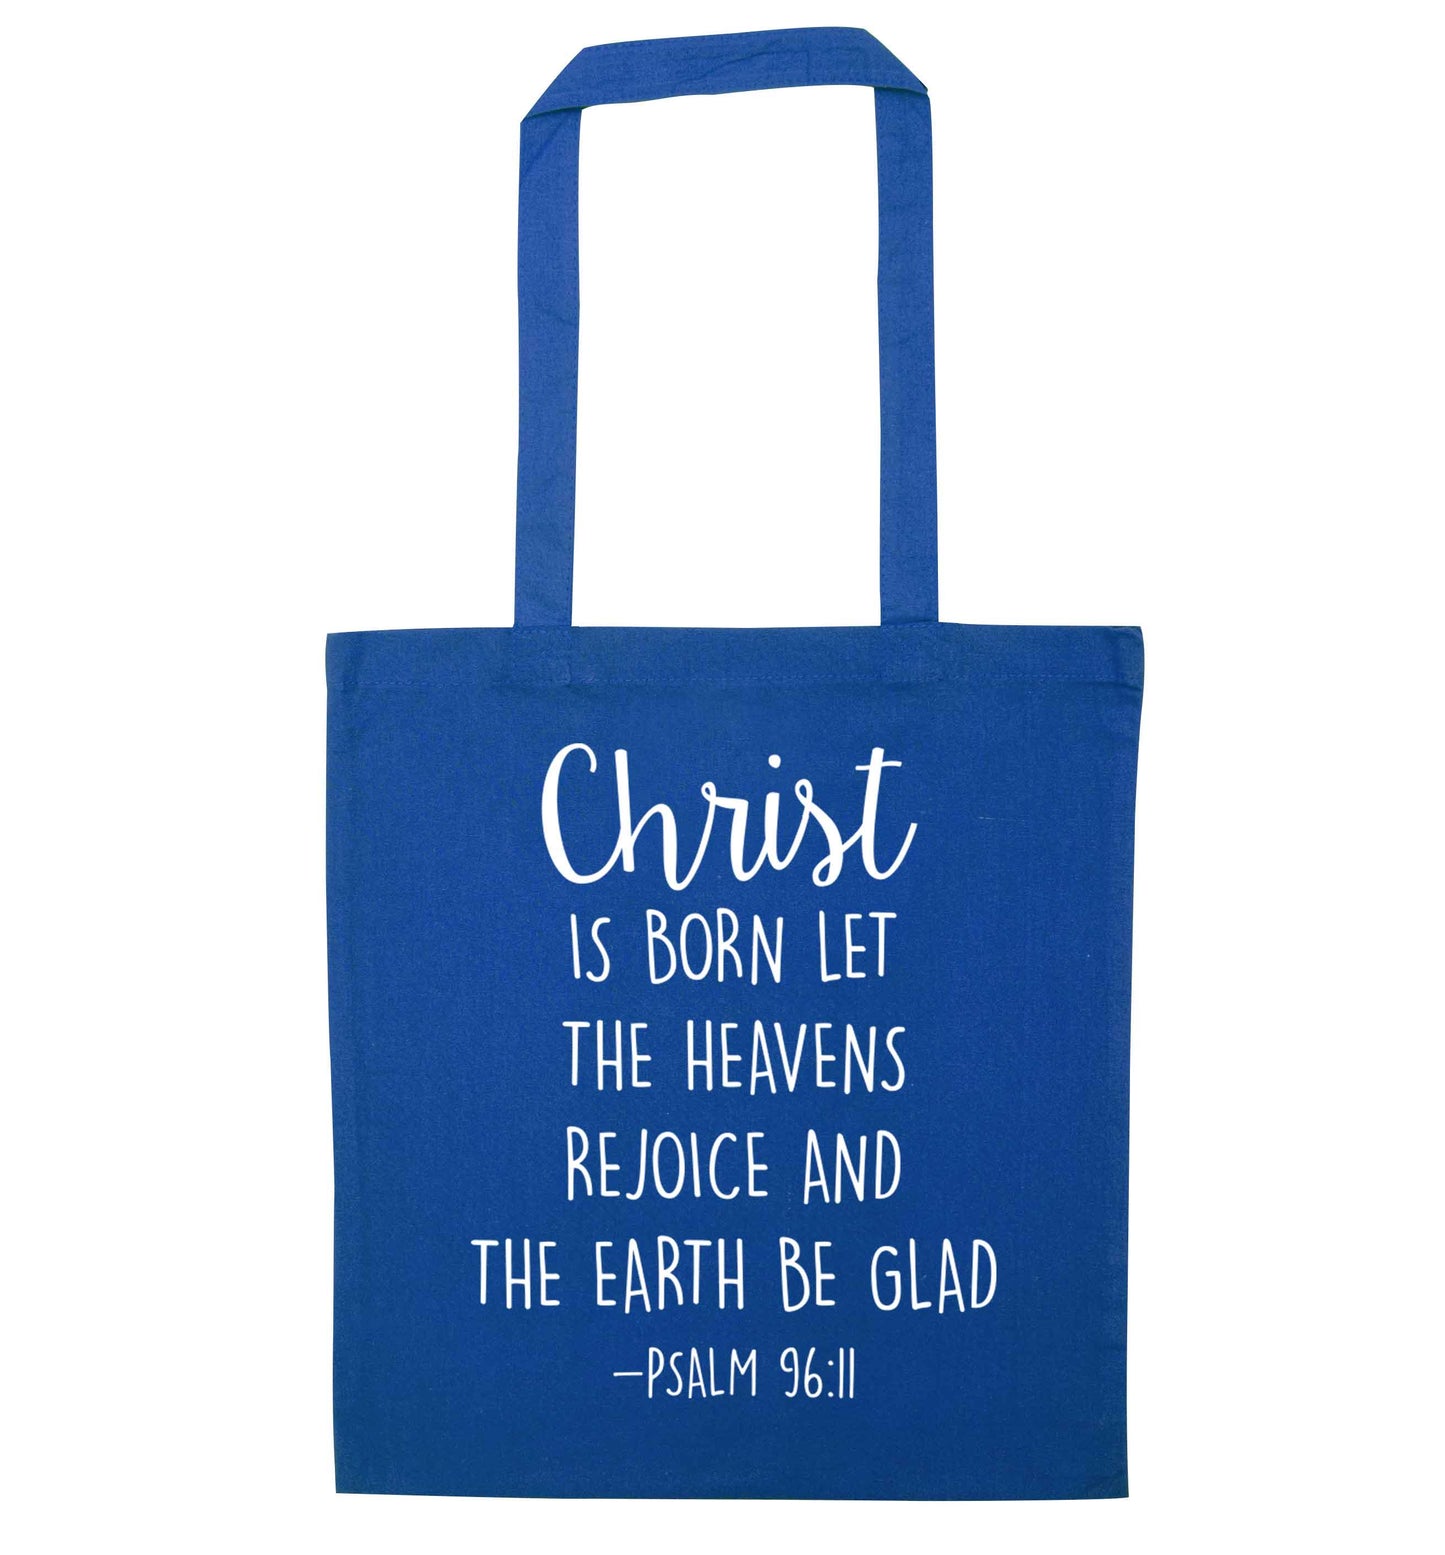 Christ is Born Psalm 96:11 blue tote bag